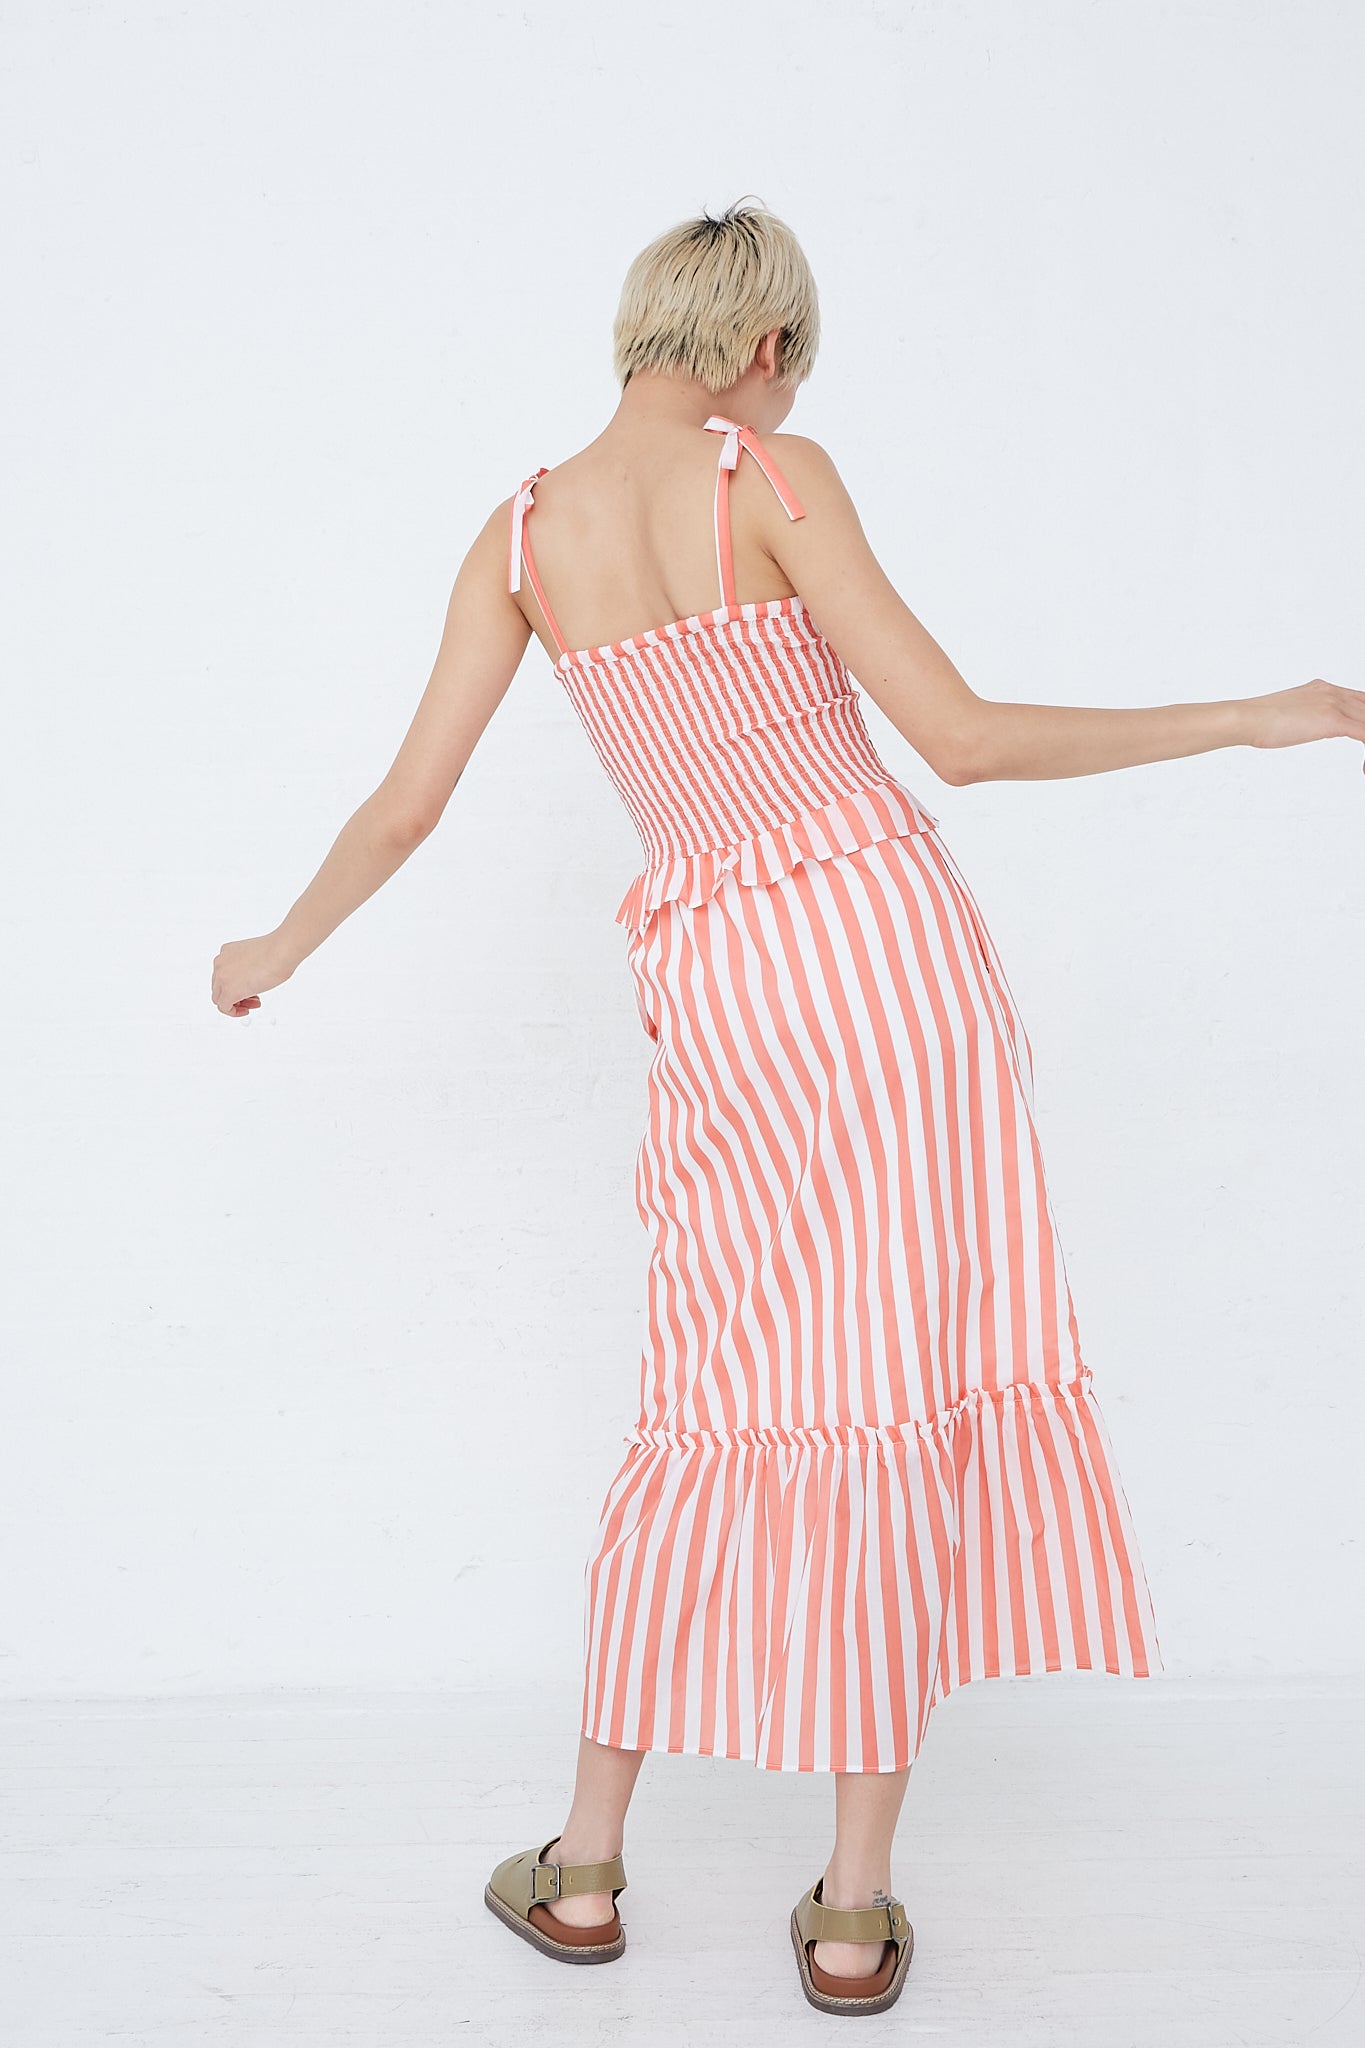 A woman in an Alberica Dress in Coral Stripe by Loretta Caponi, with adjustable tie straps in striped cotton.